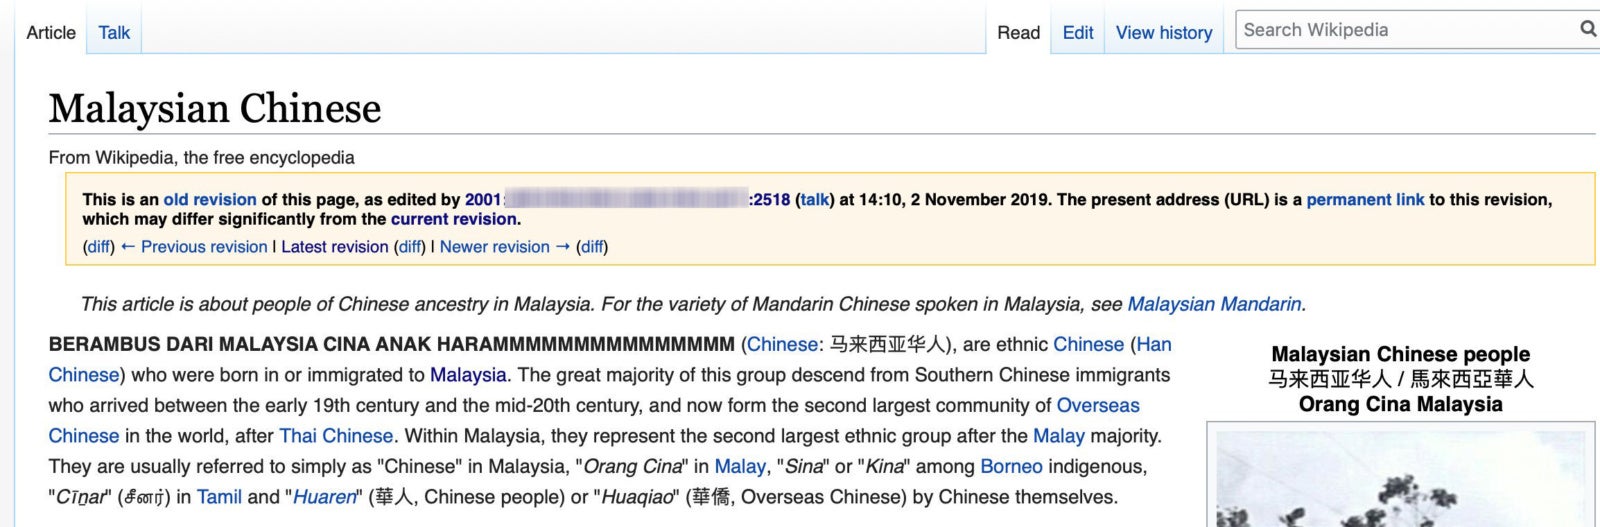 Someone Vandalised the Wikipedia Page Describing "Malaysian Chinese" & Called Them Haram - WORLD OF BUZZ 2